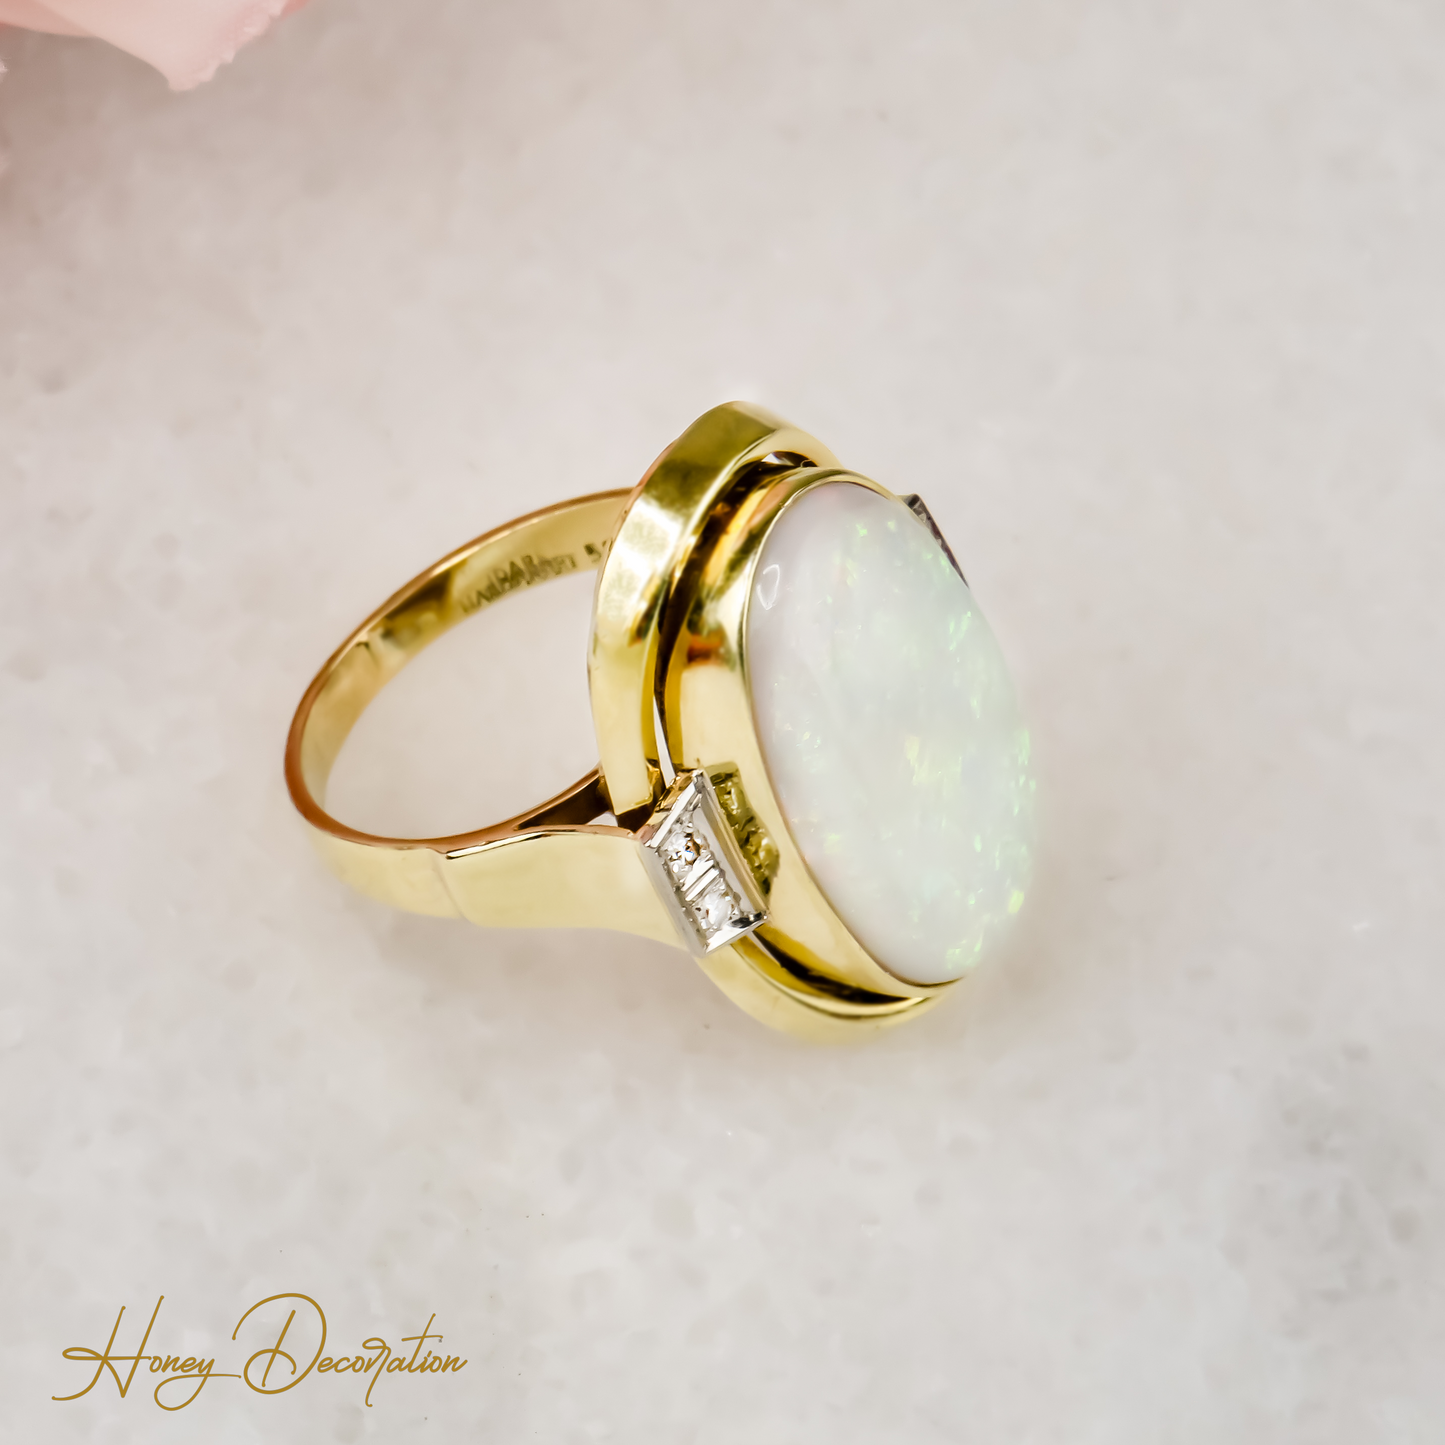 Magnificent opal ring made of 14 karat gold